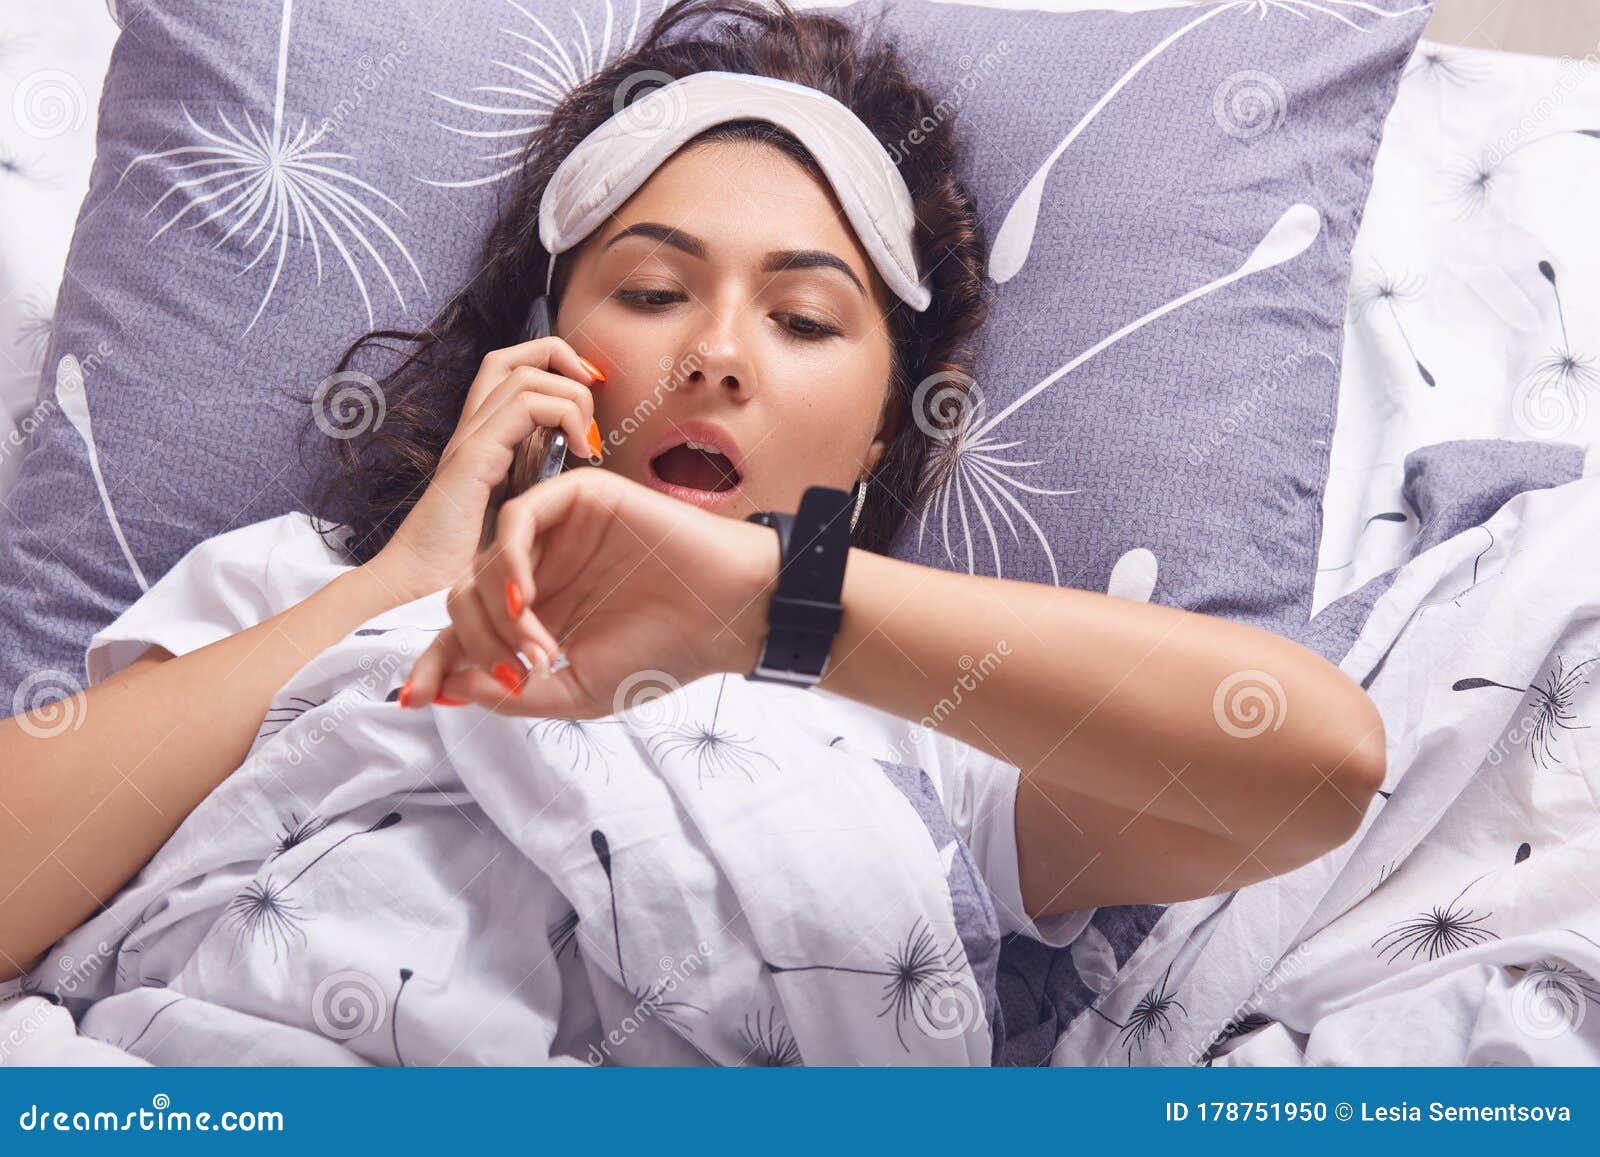 Astonished Woman Wearing Pajama And Sleeping Mask Posing With Opened Mouth Looking At Smart 